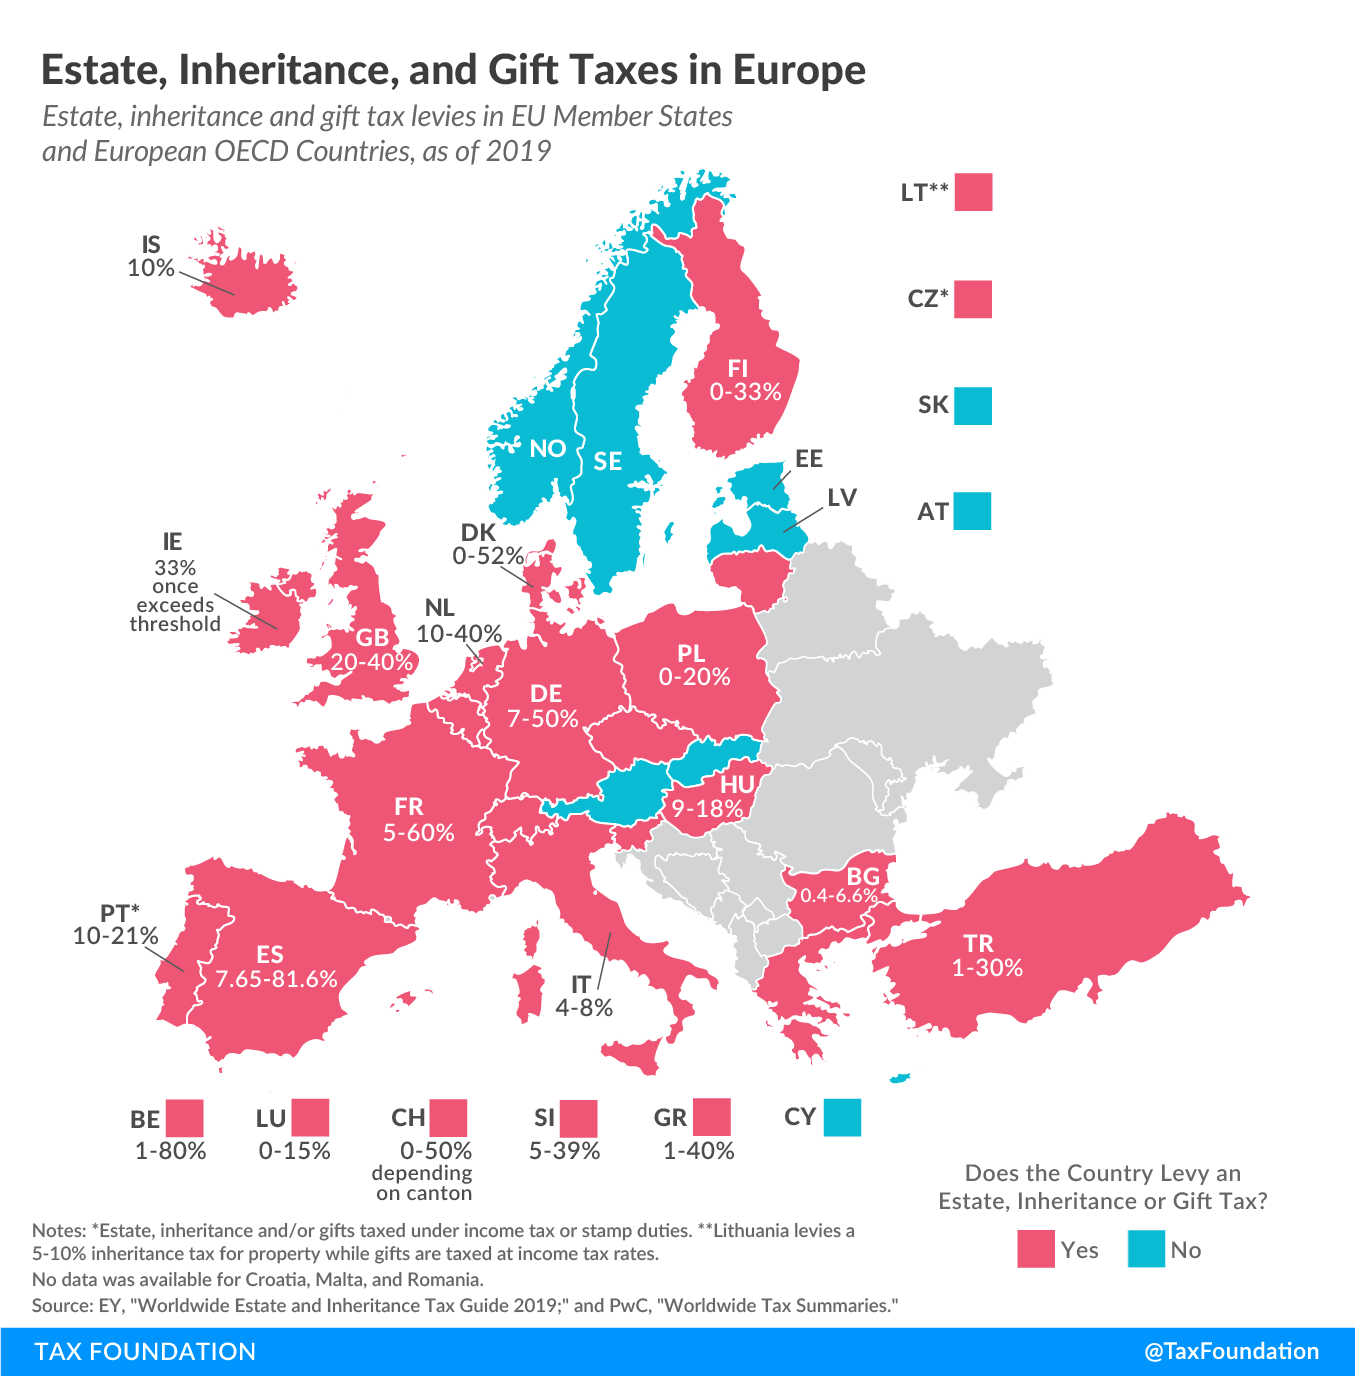 inheritance taxes in europe, estate taxes in europe, Estate tax europe, inheritance tax europe, gift tax europe